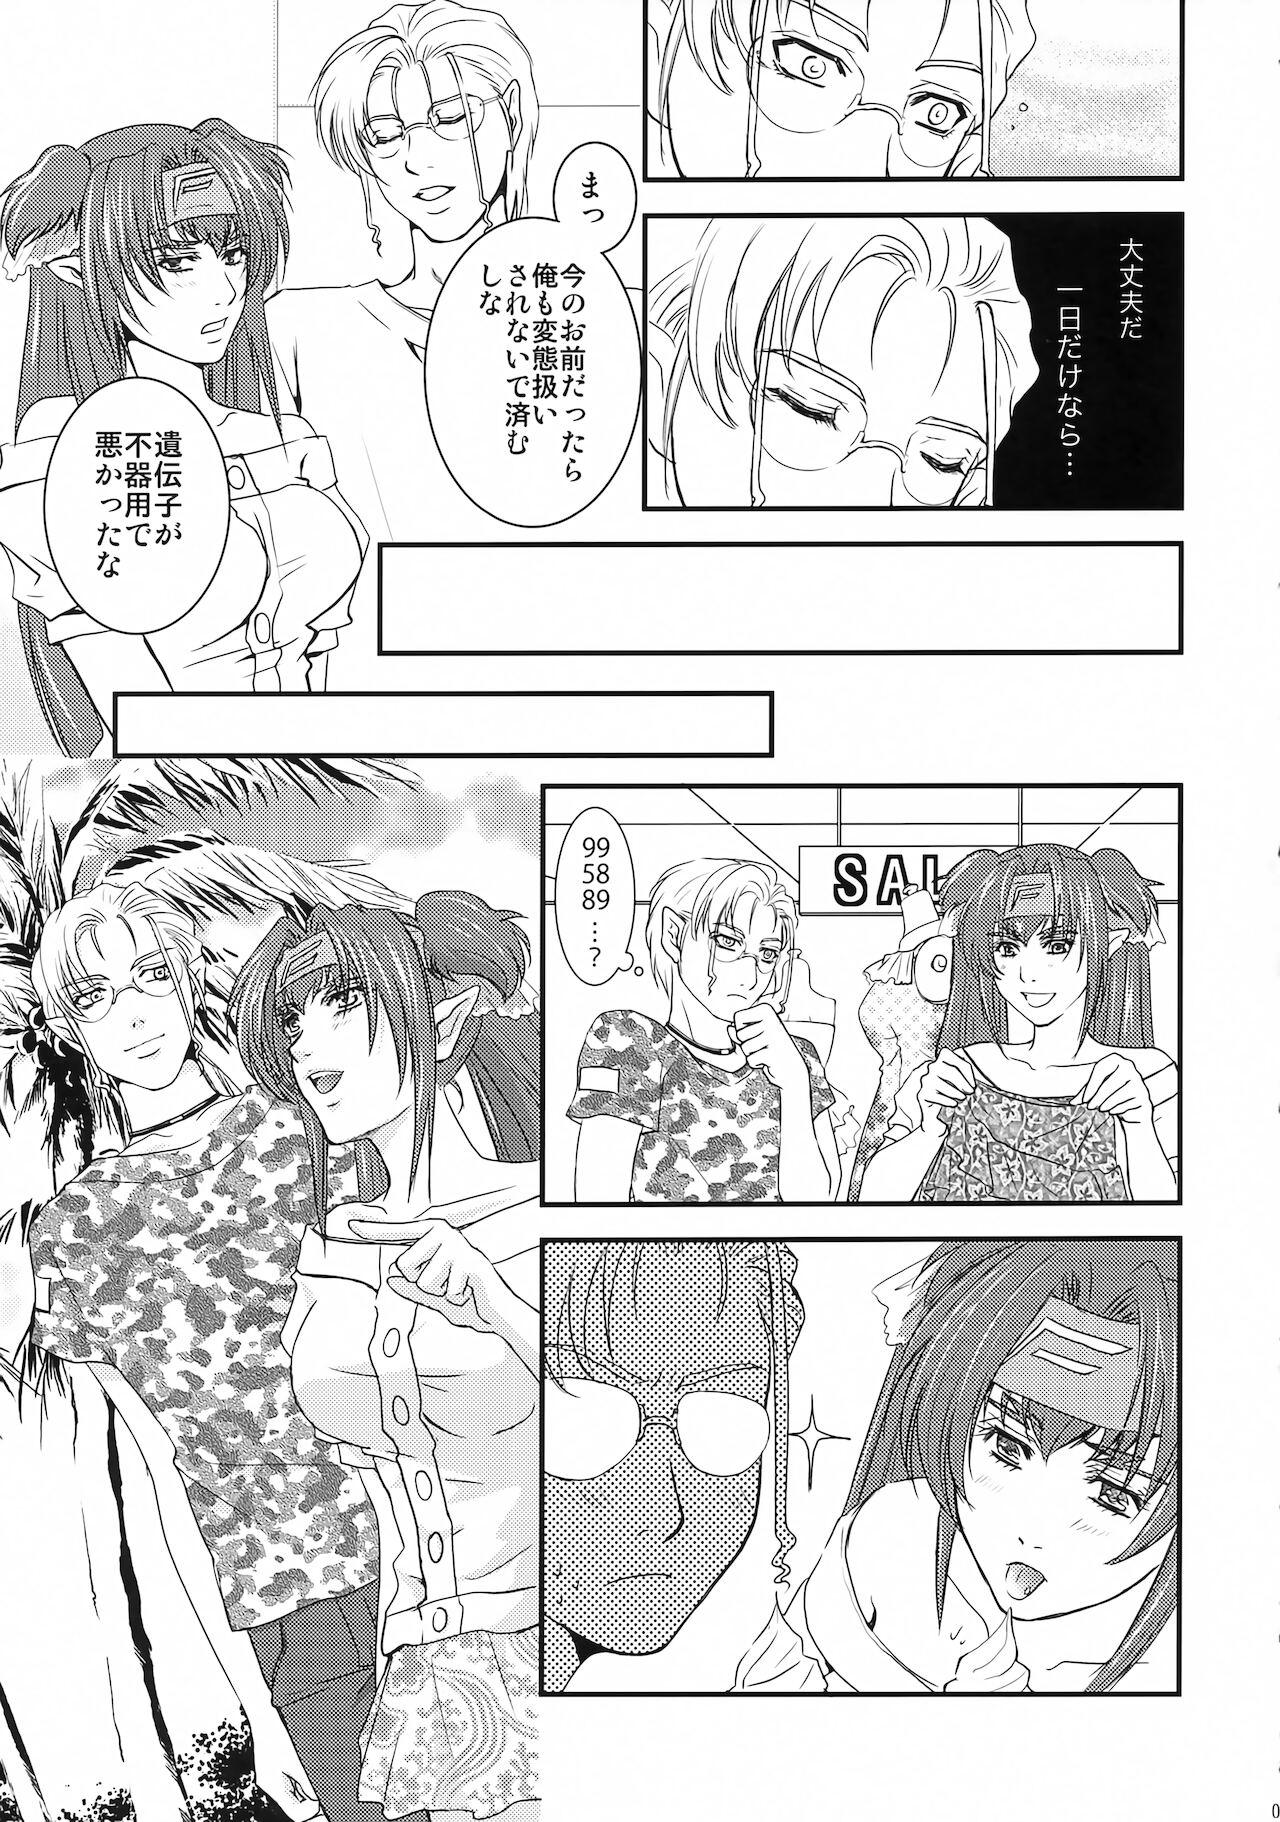 Zorra Synthetic - Macross frontier Candid - Page 9